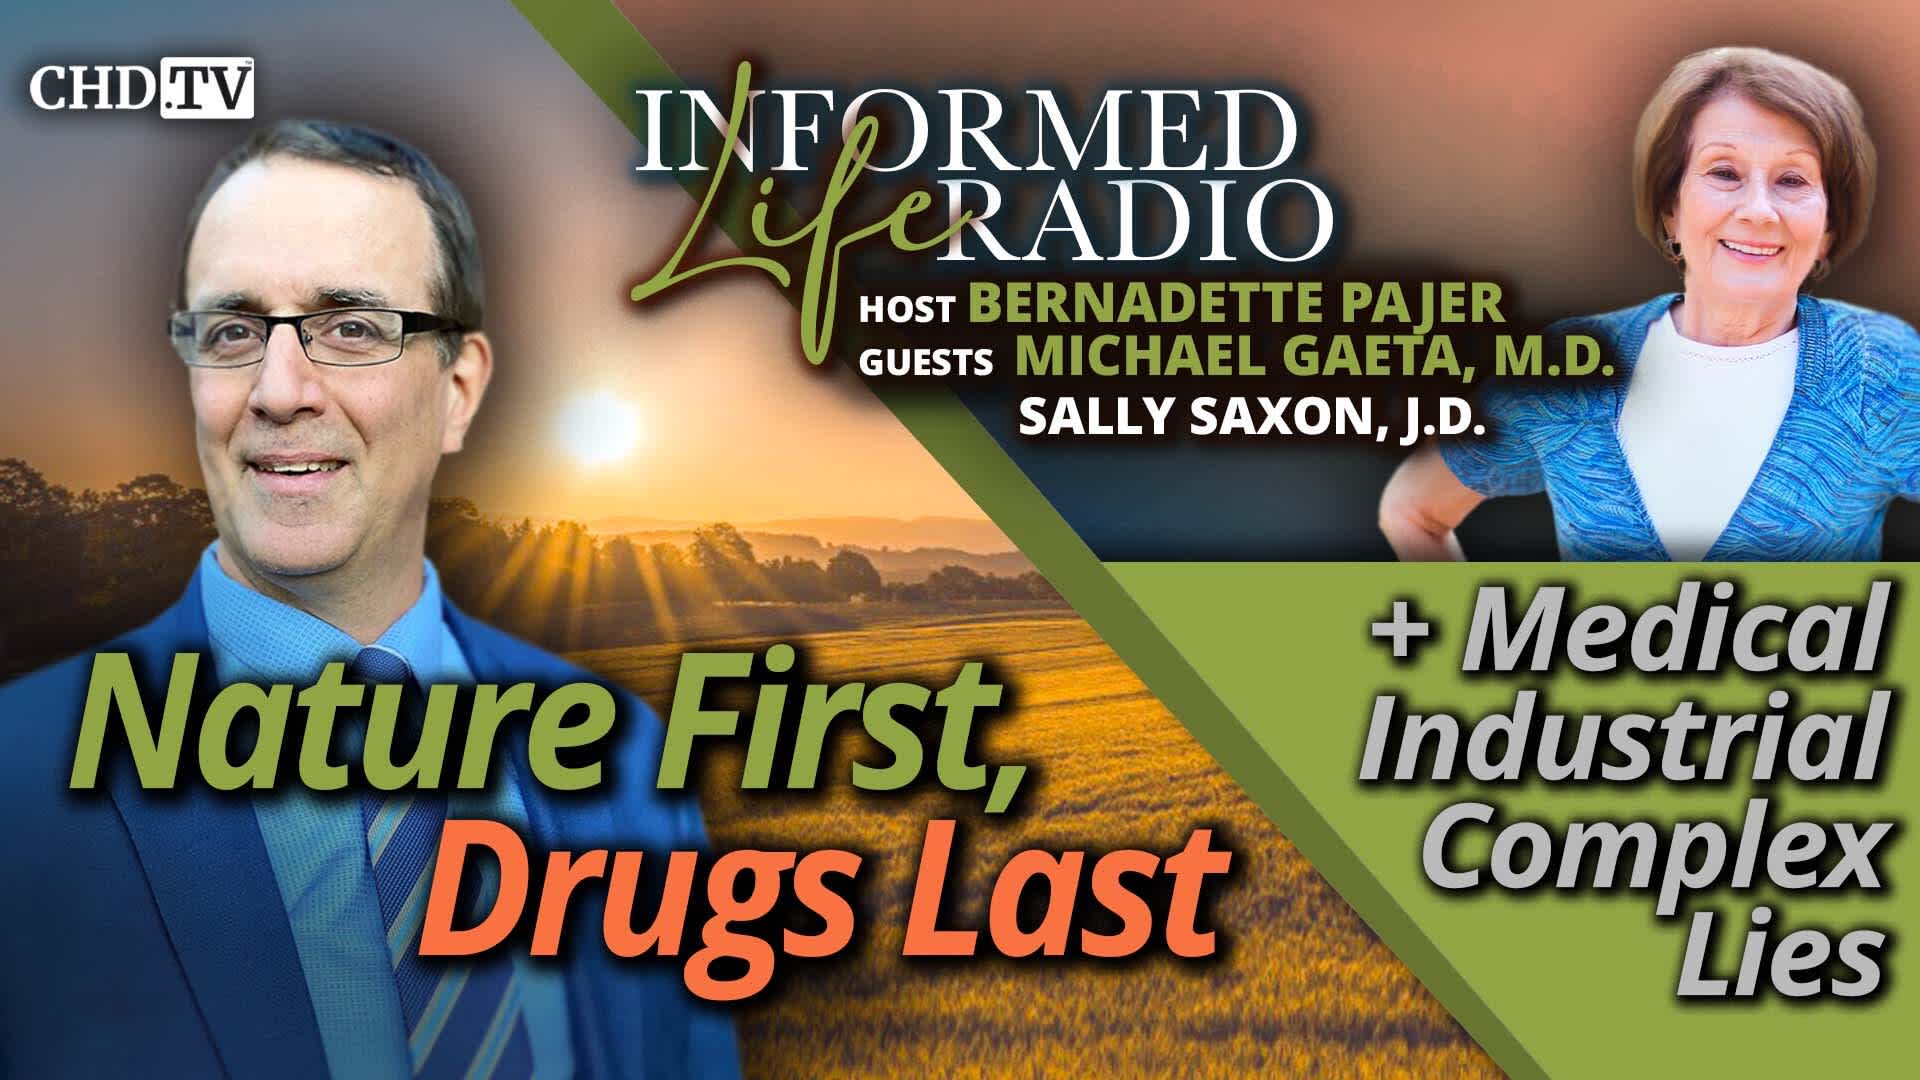 Nature First, Drugs Last + Medical Industrial Complex Lies